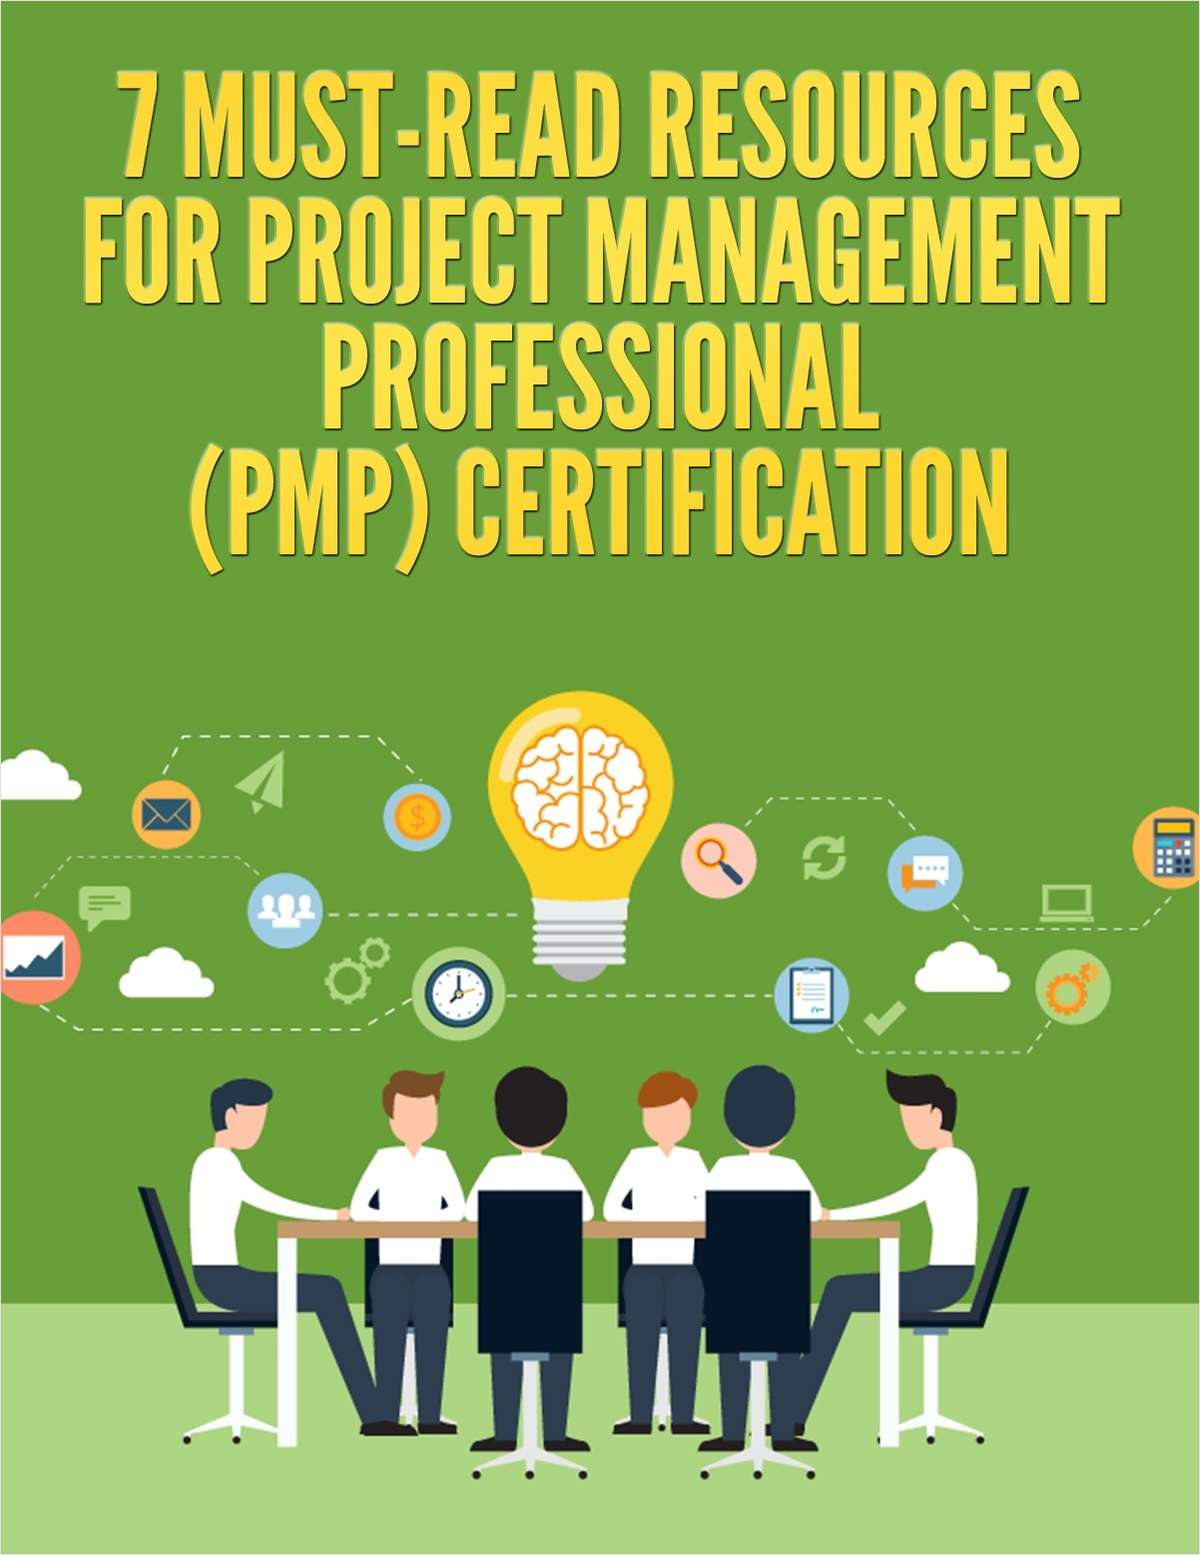 7 Must-Read Resources for Project Management Professional (PMP) Certification